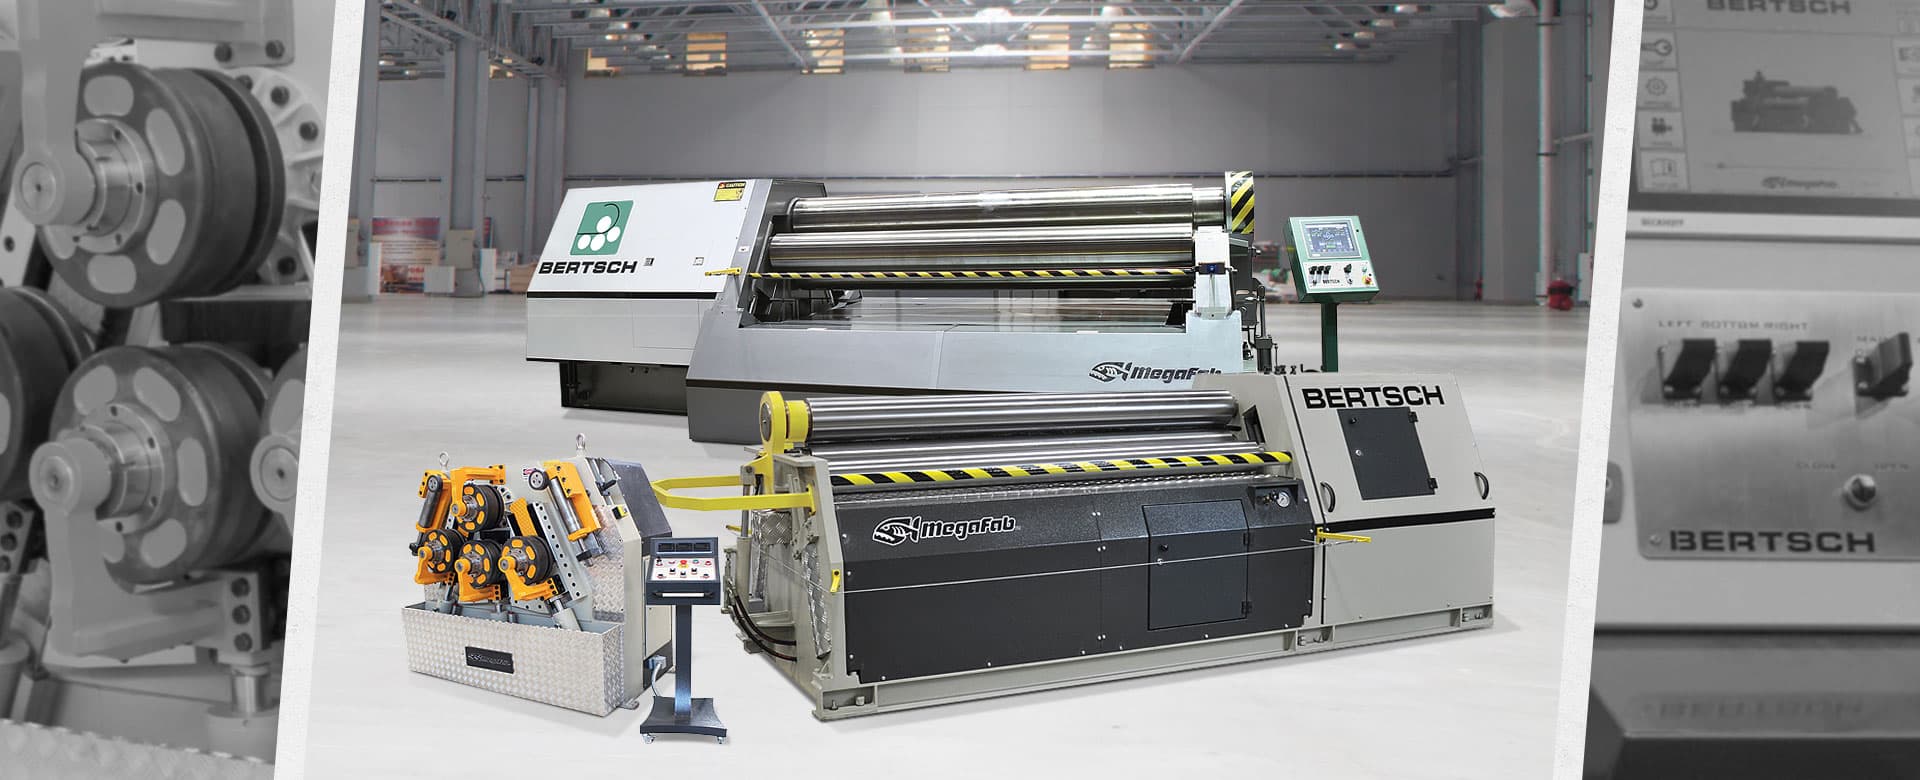 GSS Machinery offers Bertsch angle and plate rolls